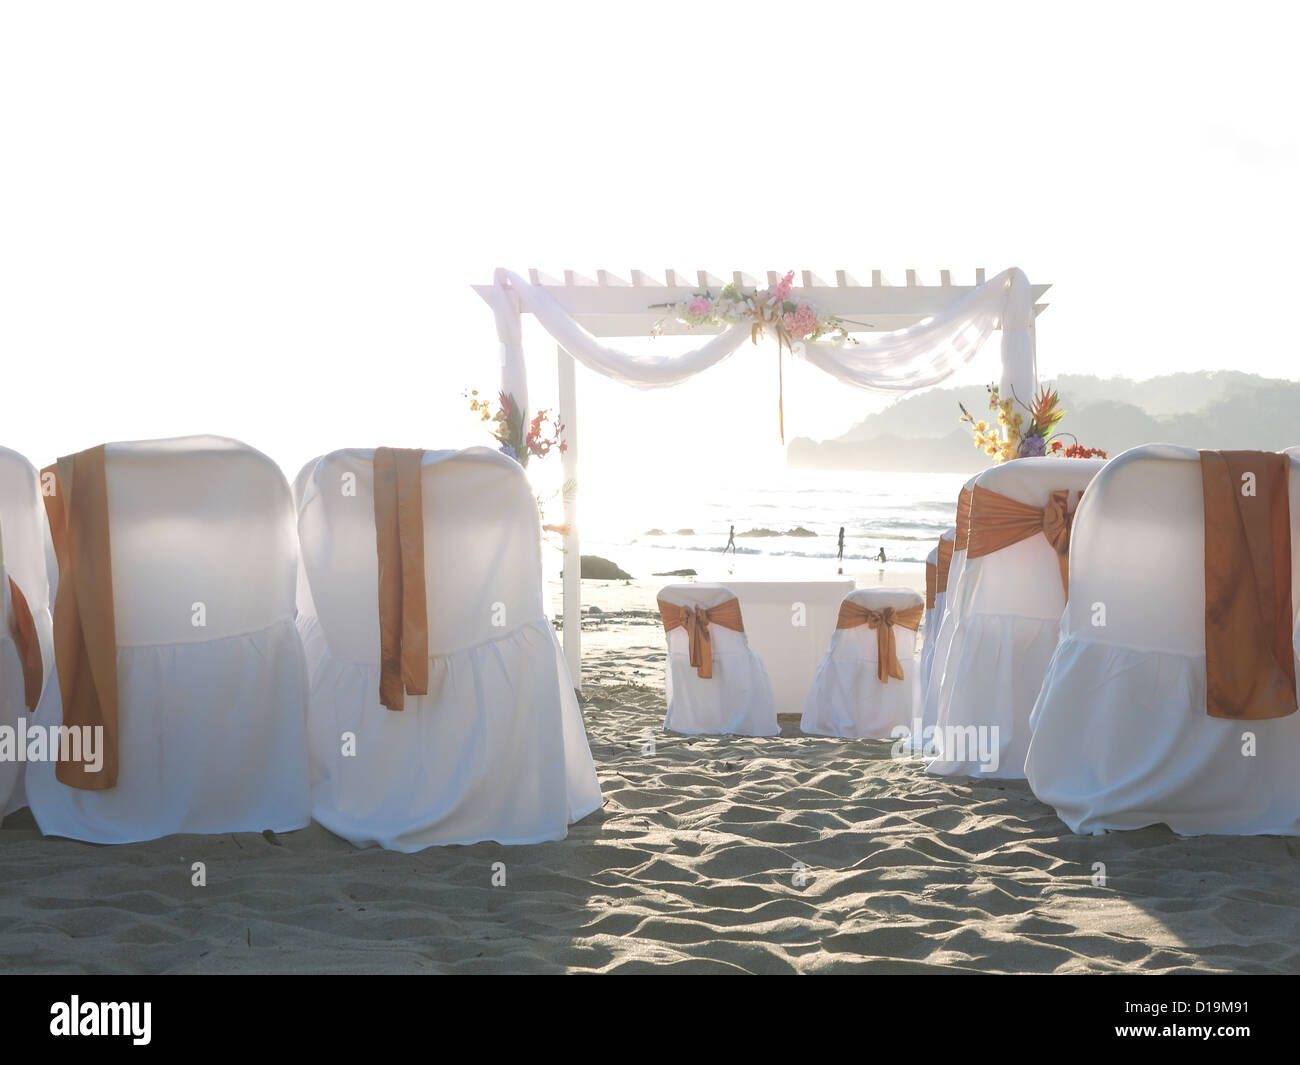 decoration with white chair covers for a wedding ceremony,Playa Carryllo; Nicoya Peninsula; Costa Rica Stock Photo